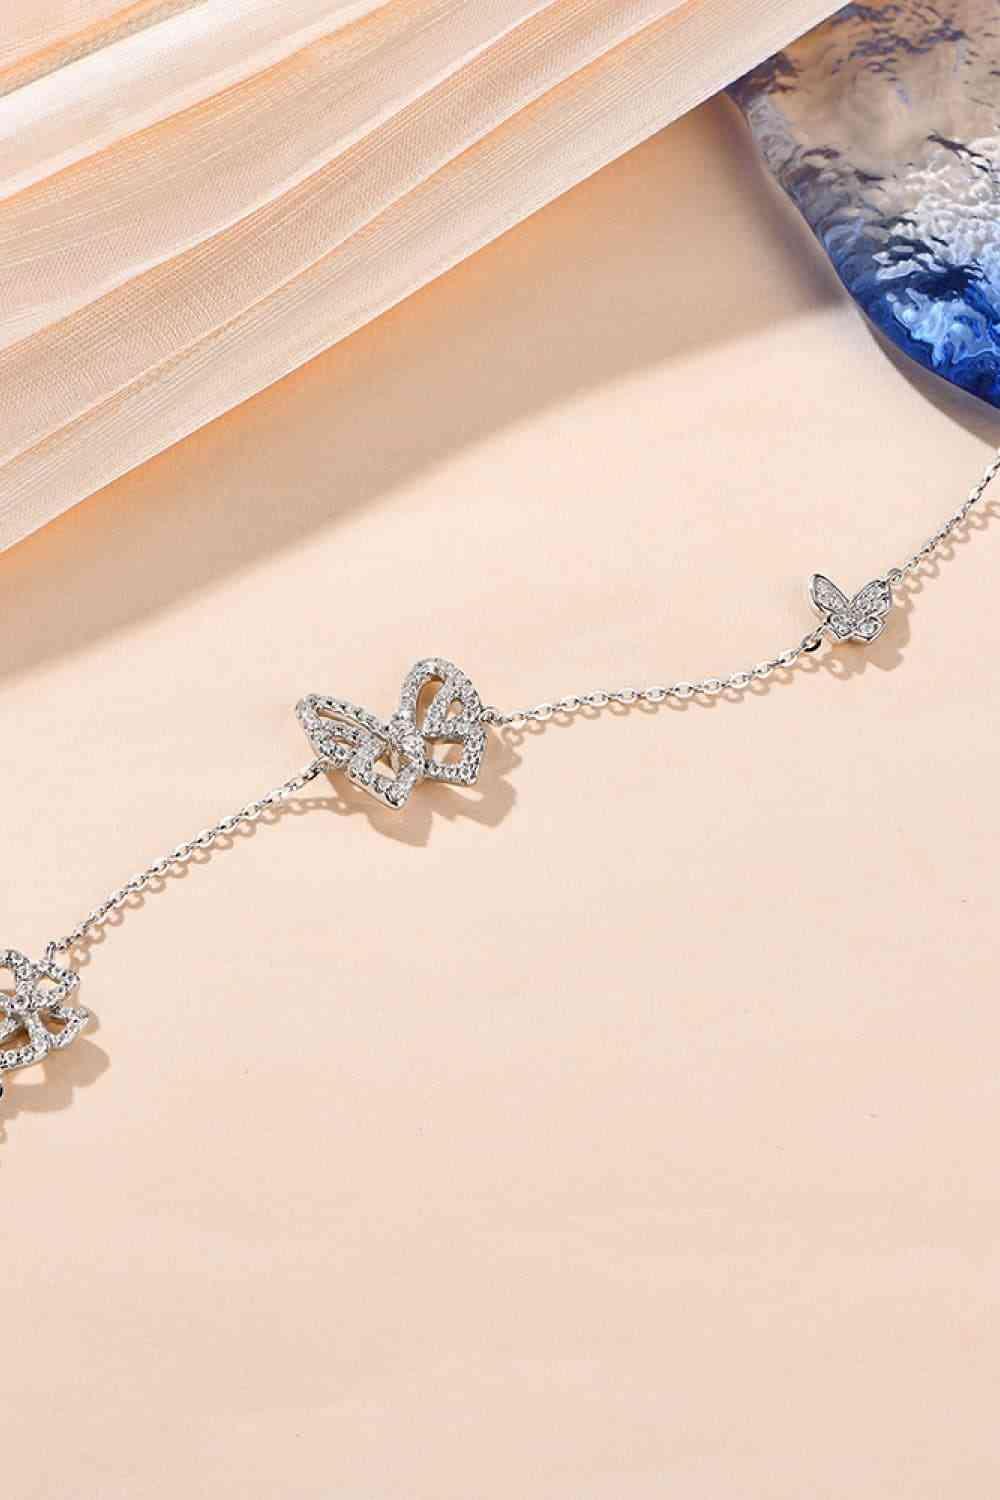 a close up of a necklace with butterflies on it